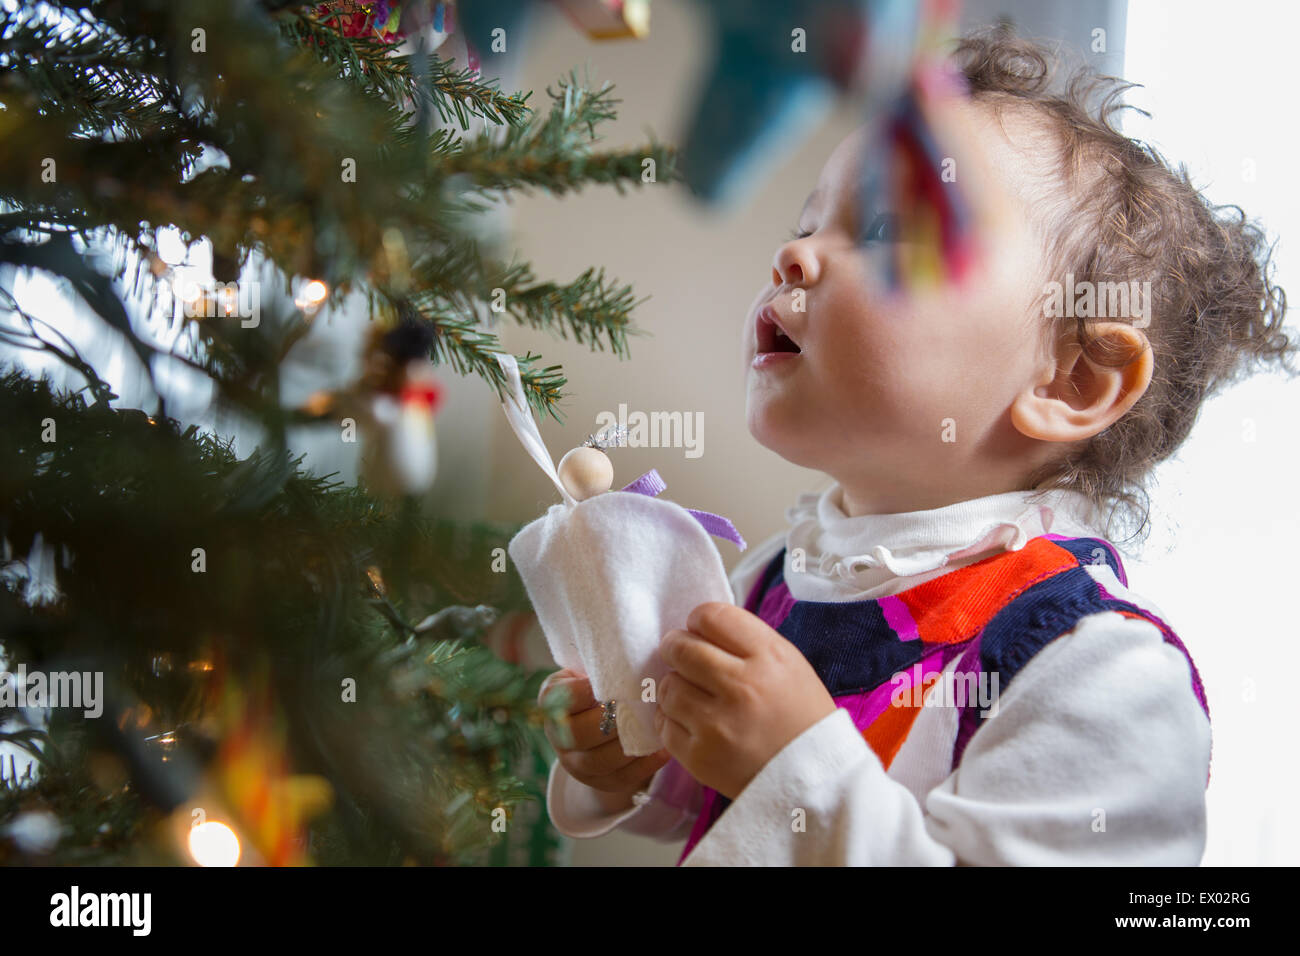 Little girl looking at angel ornament on Christmas tree Stock Photo